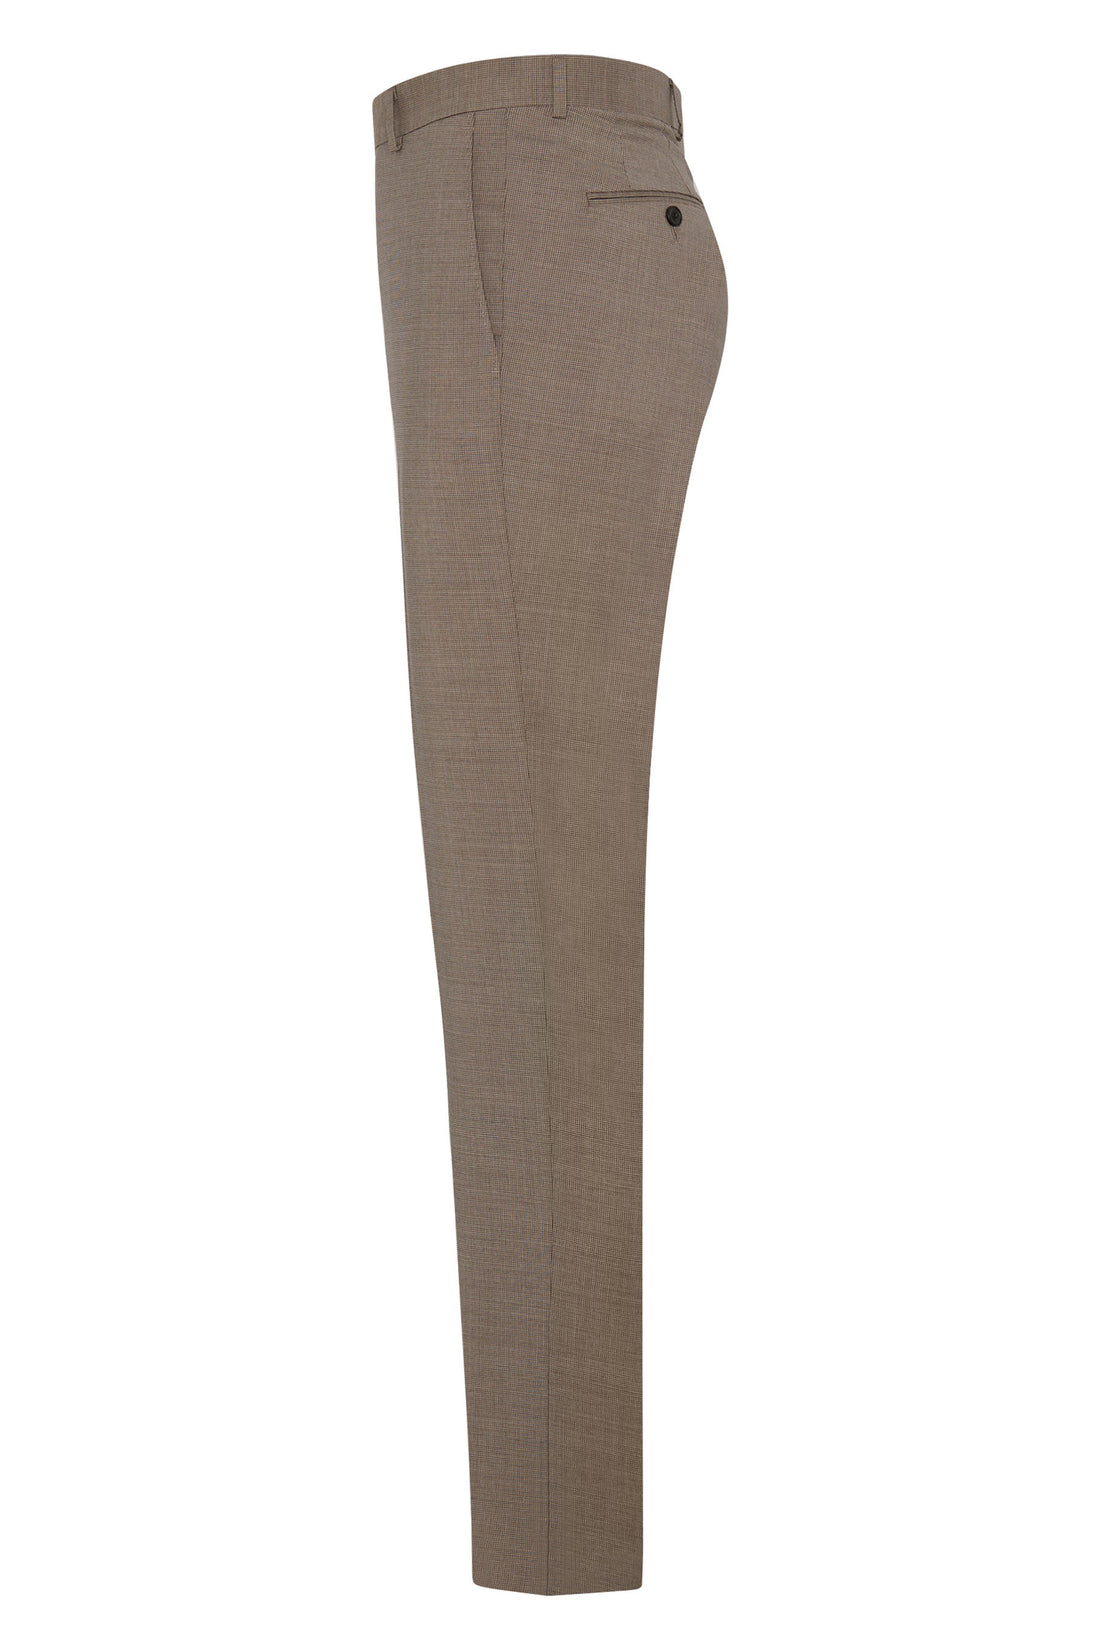 Tan Tropical Wool Neat Flat Front Trousers